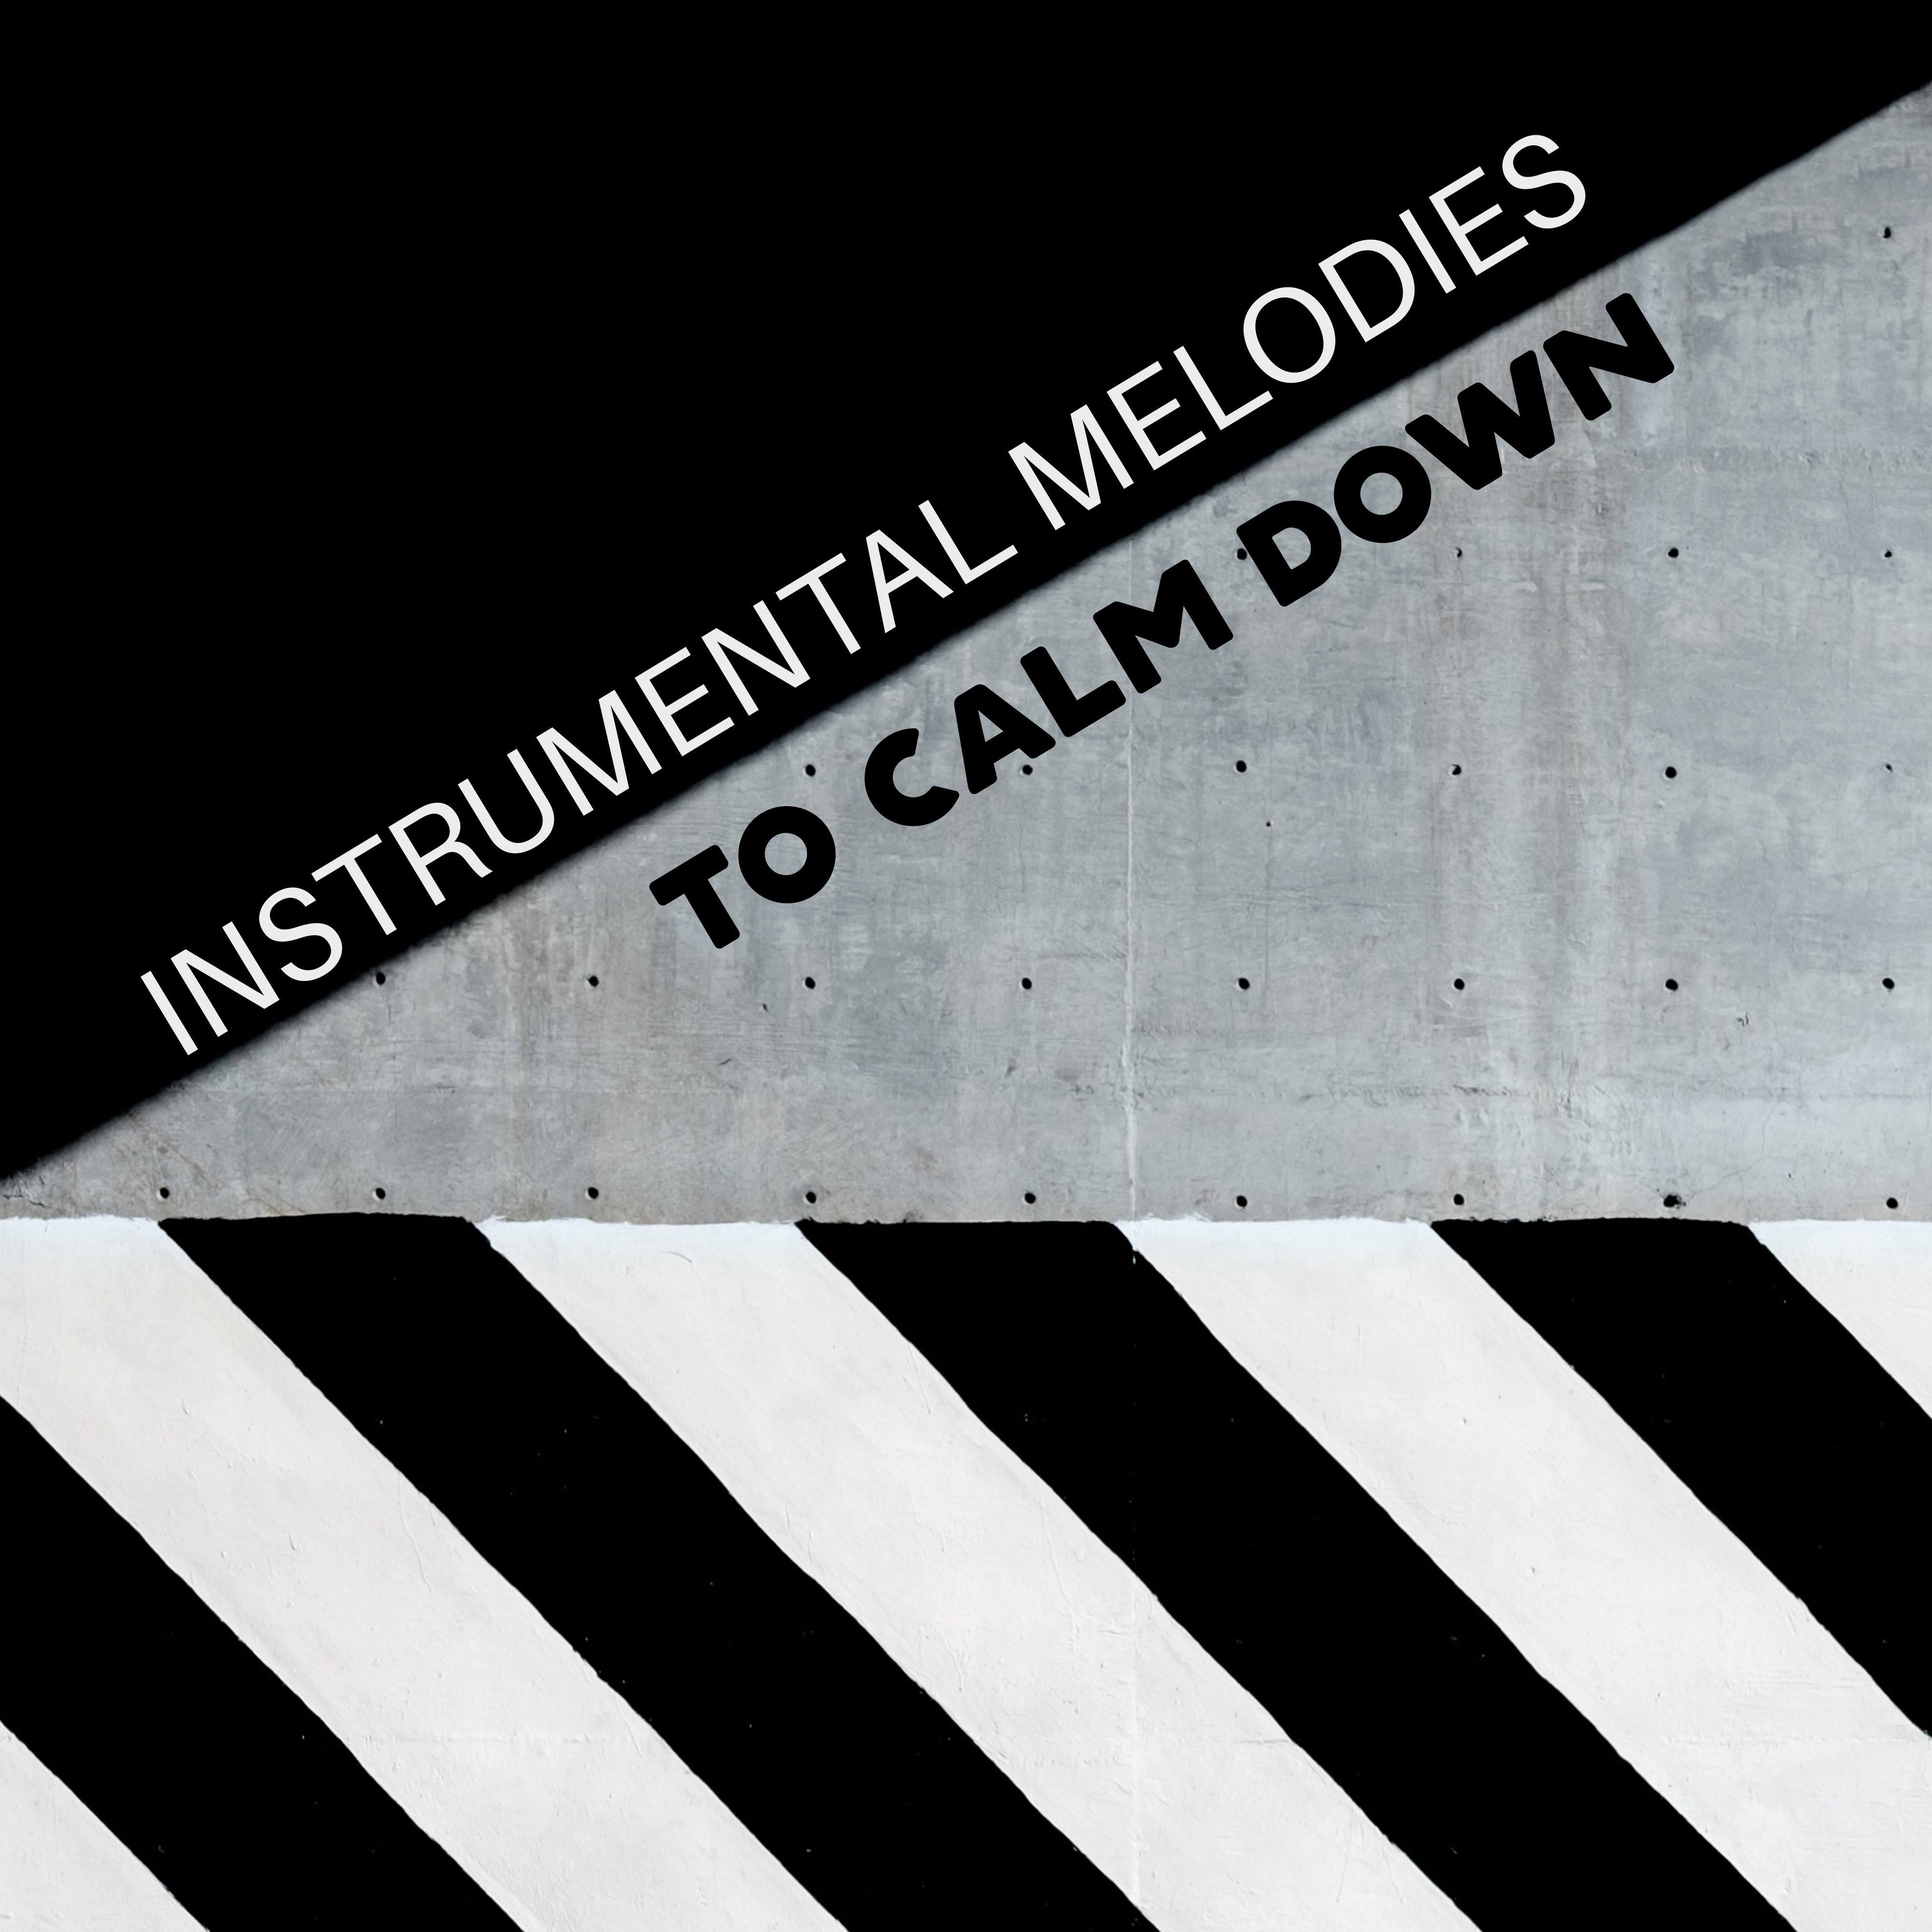 Instrumental Melodies to Calm Down